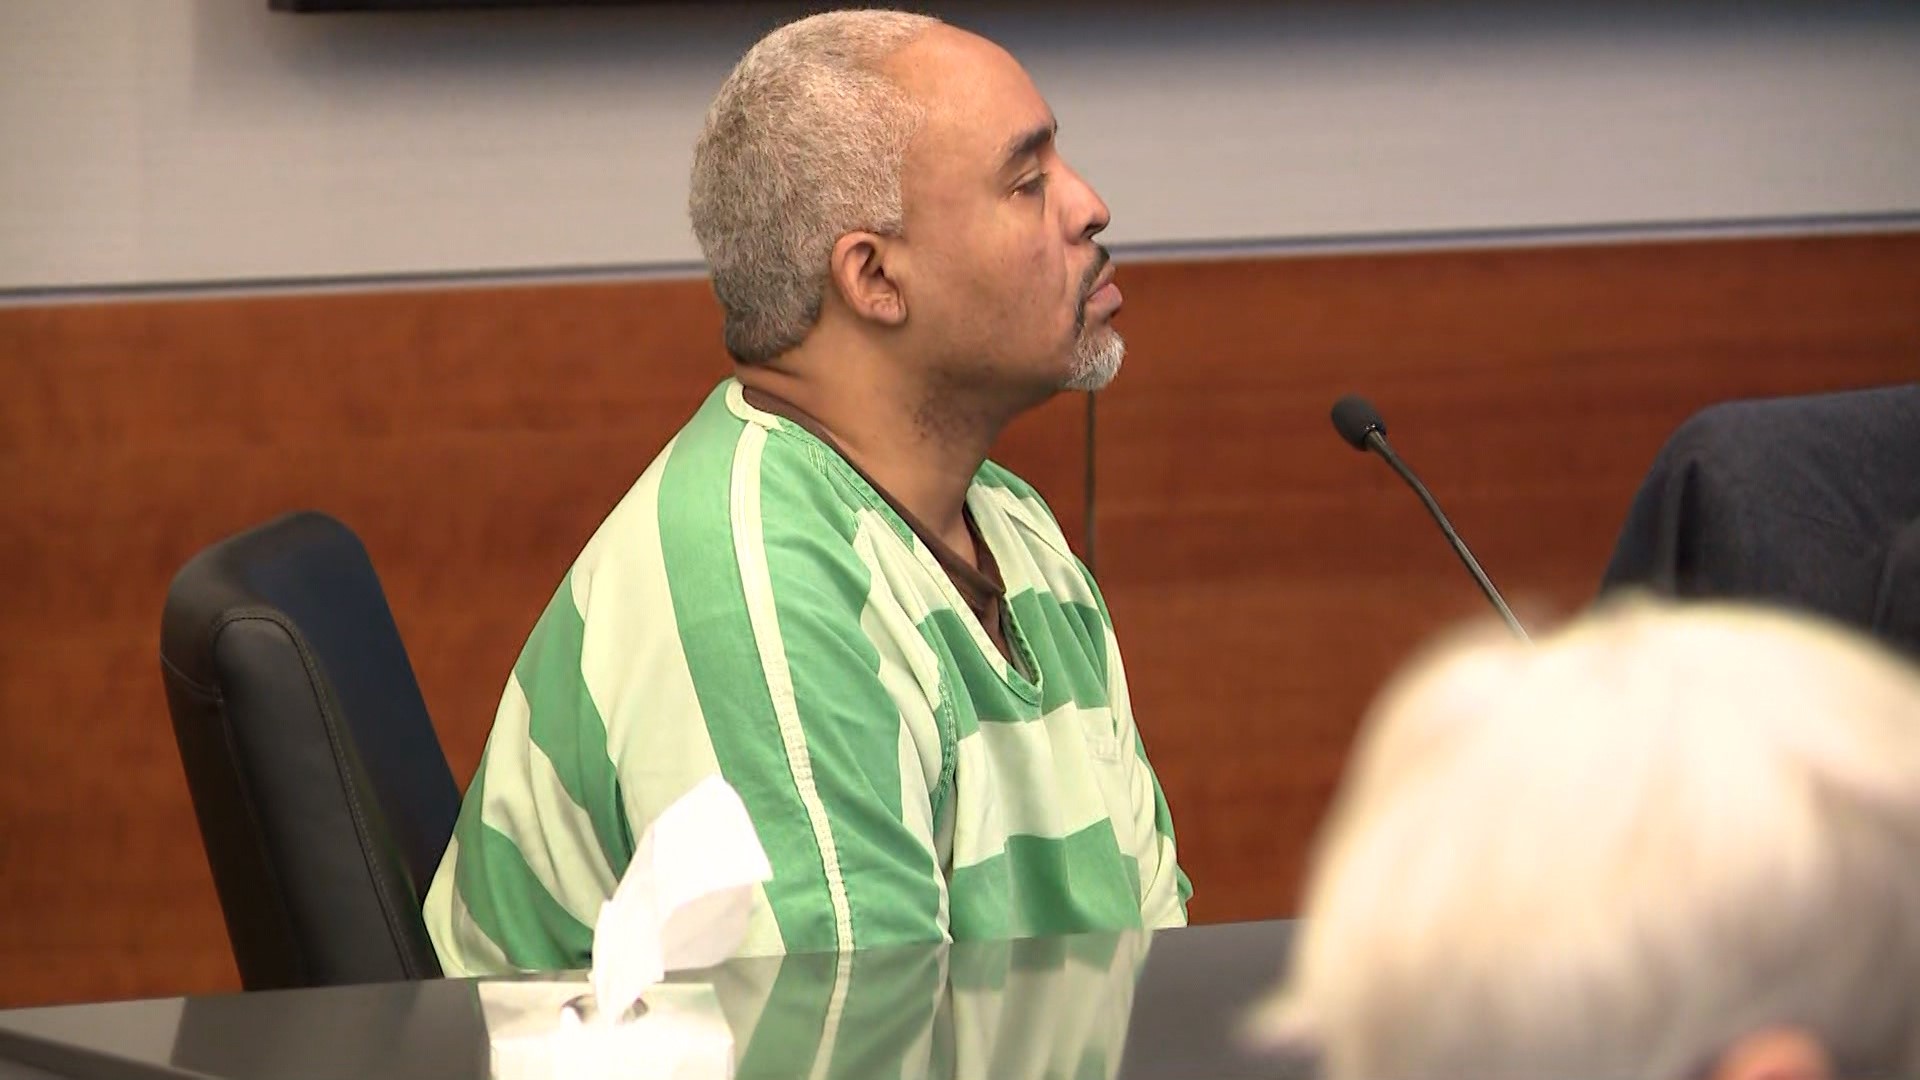 In early November, Keith Jones was found guilty of six criminal charges in connection to the Dec. 13, 2022 crash that killed 4-year-old Marcos Faguada.